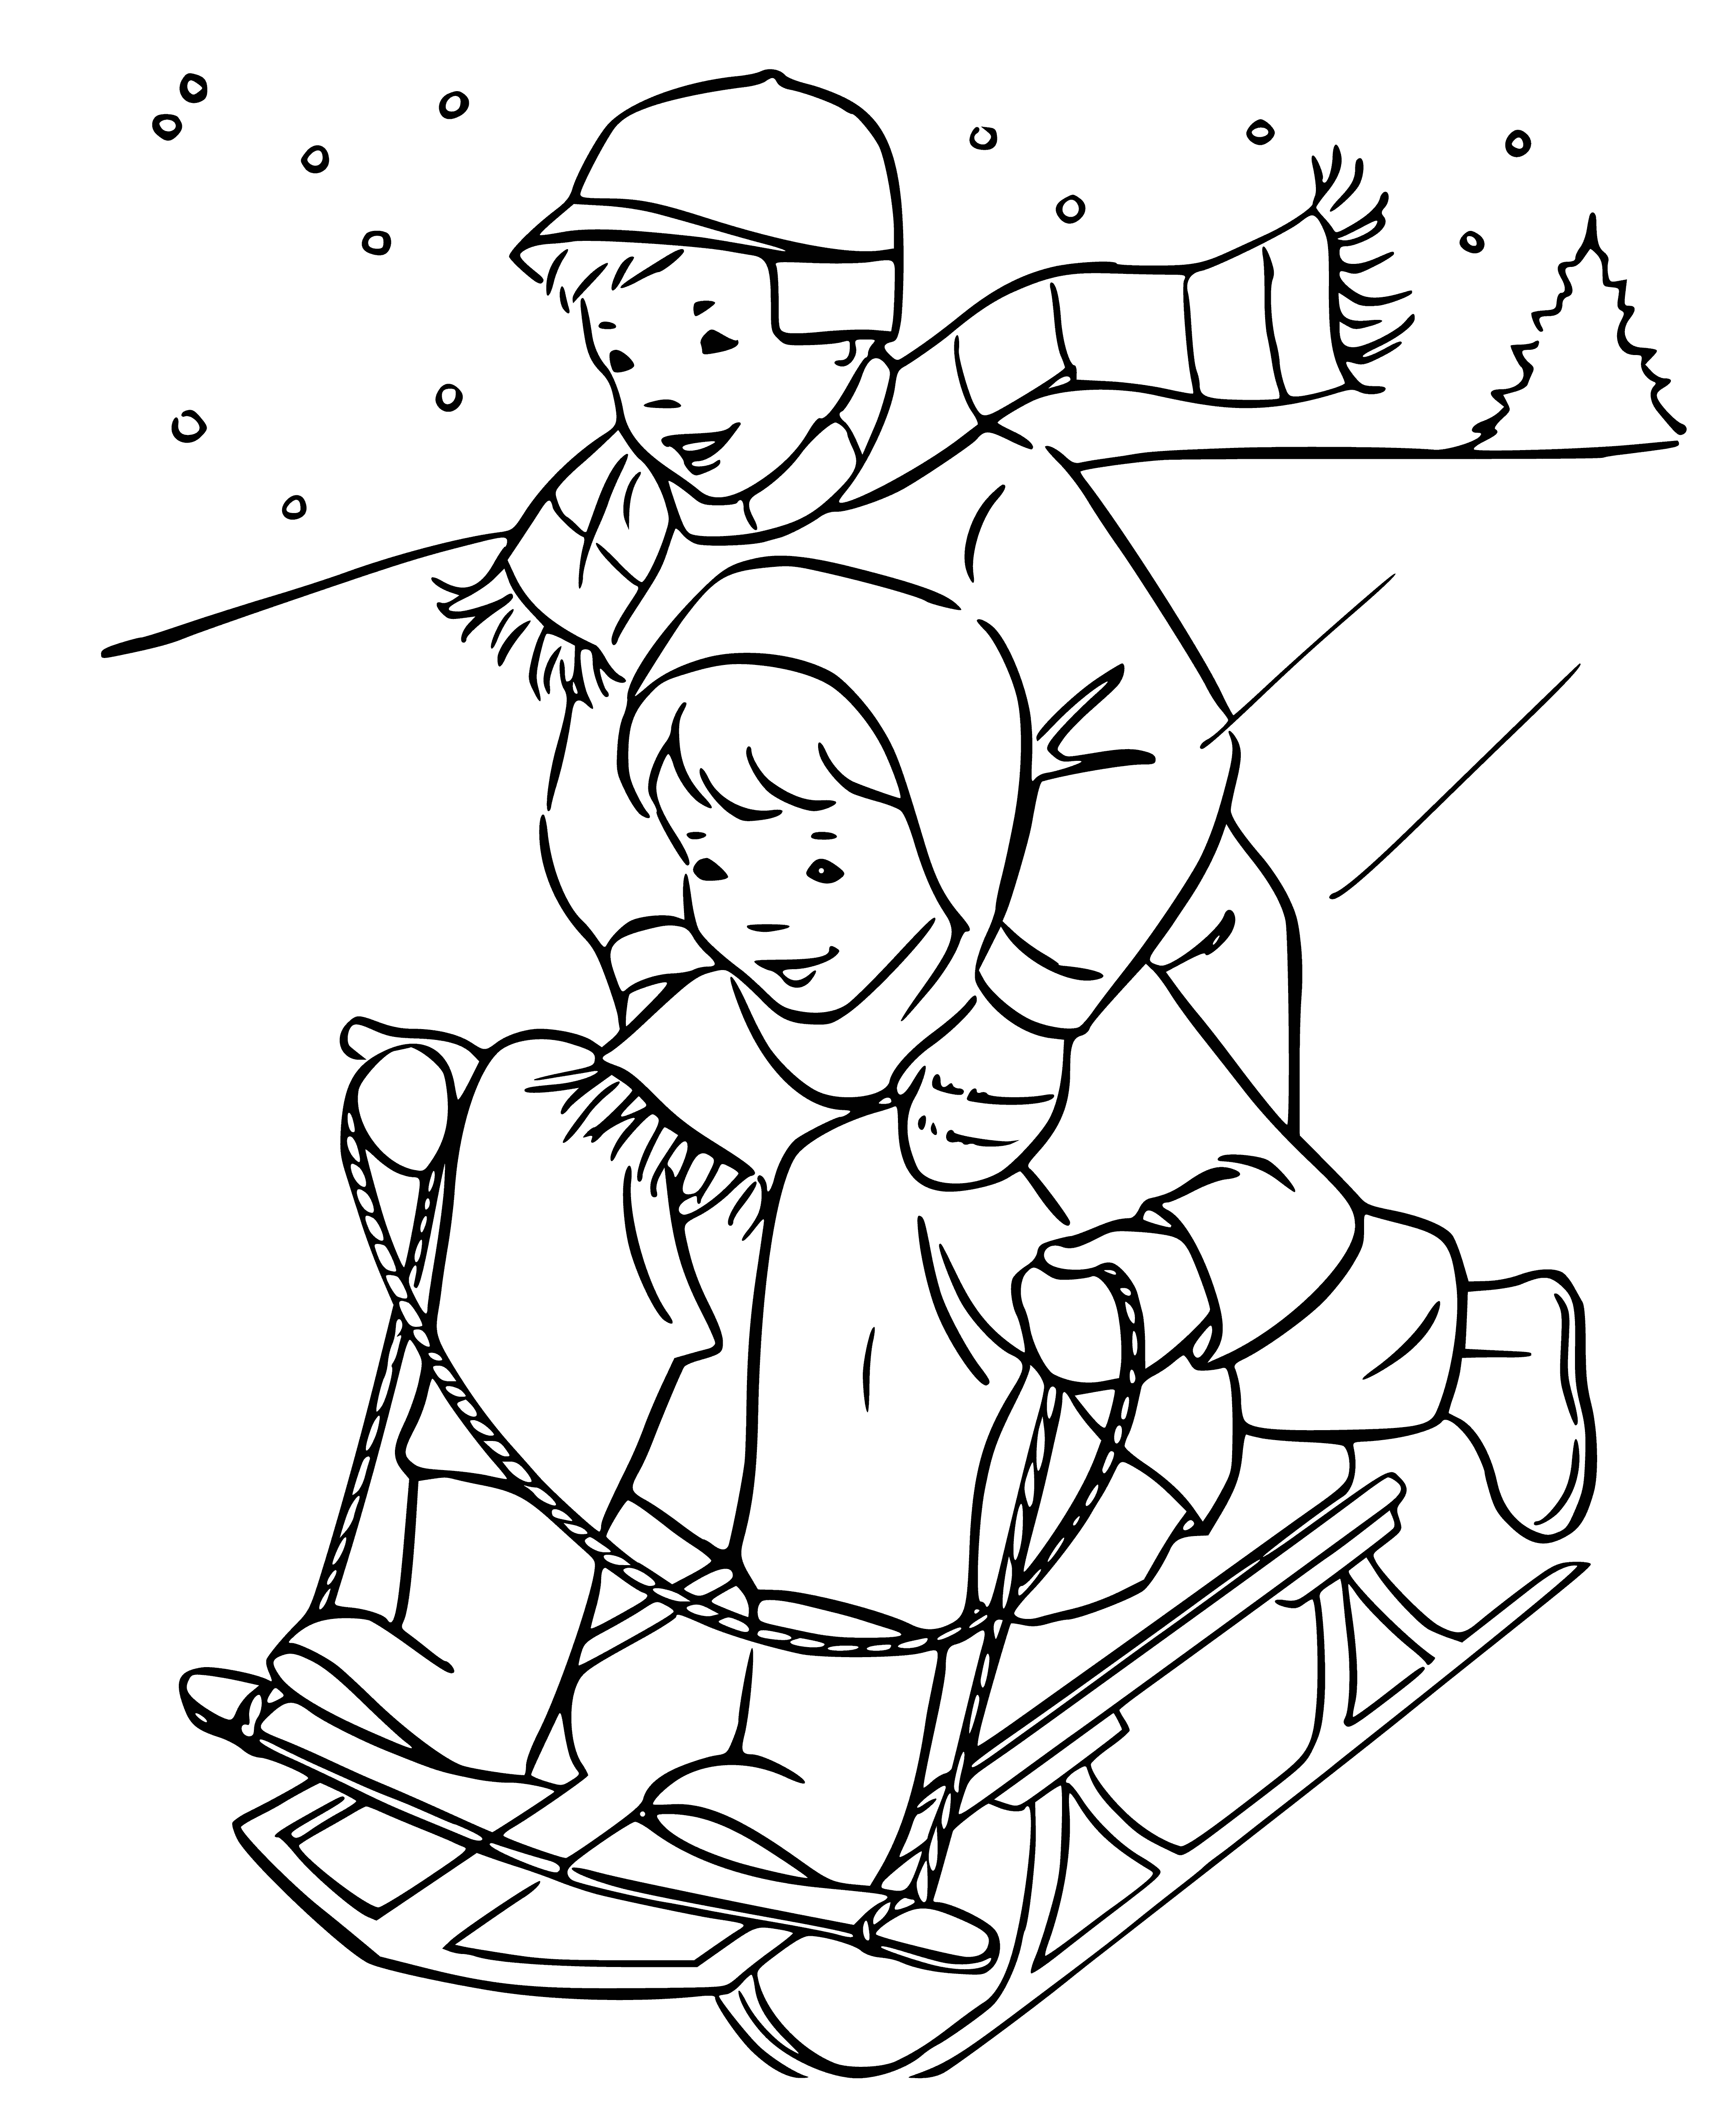 coloring page: Kids sledding down hill, playing in sun-lit snow. Some laughing, some scared - an important lesson in joy and fear. #WinterFun